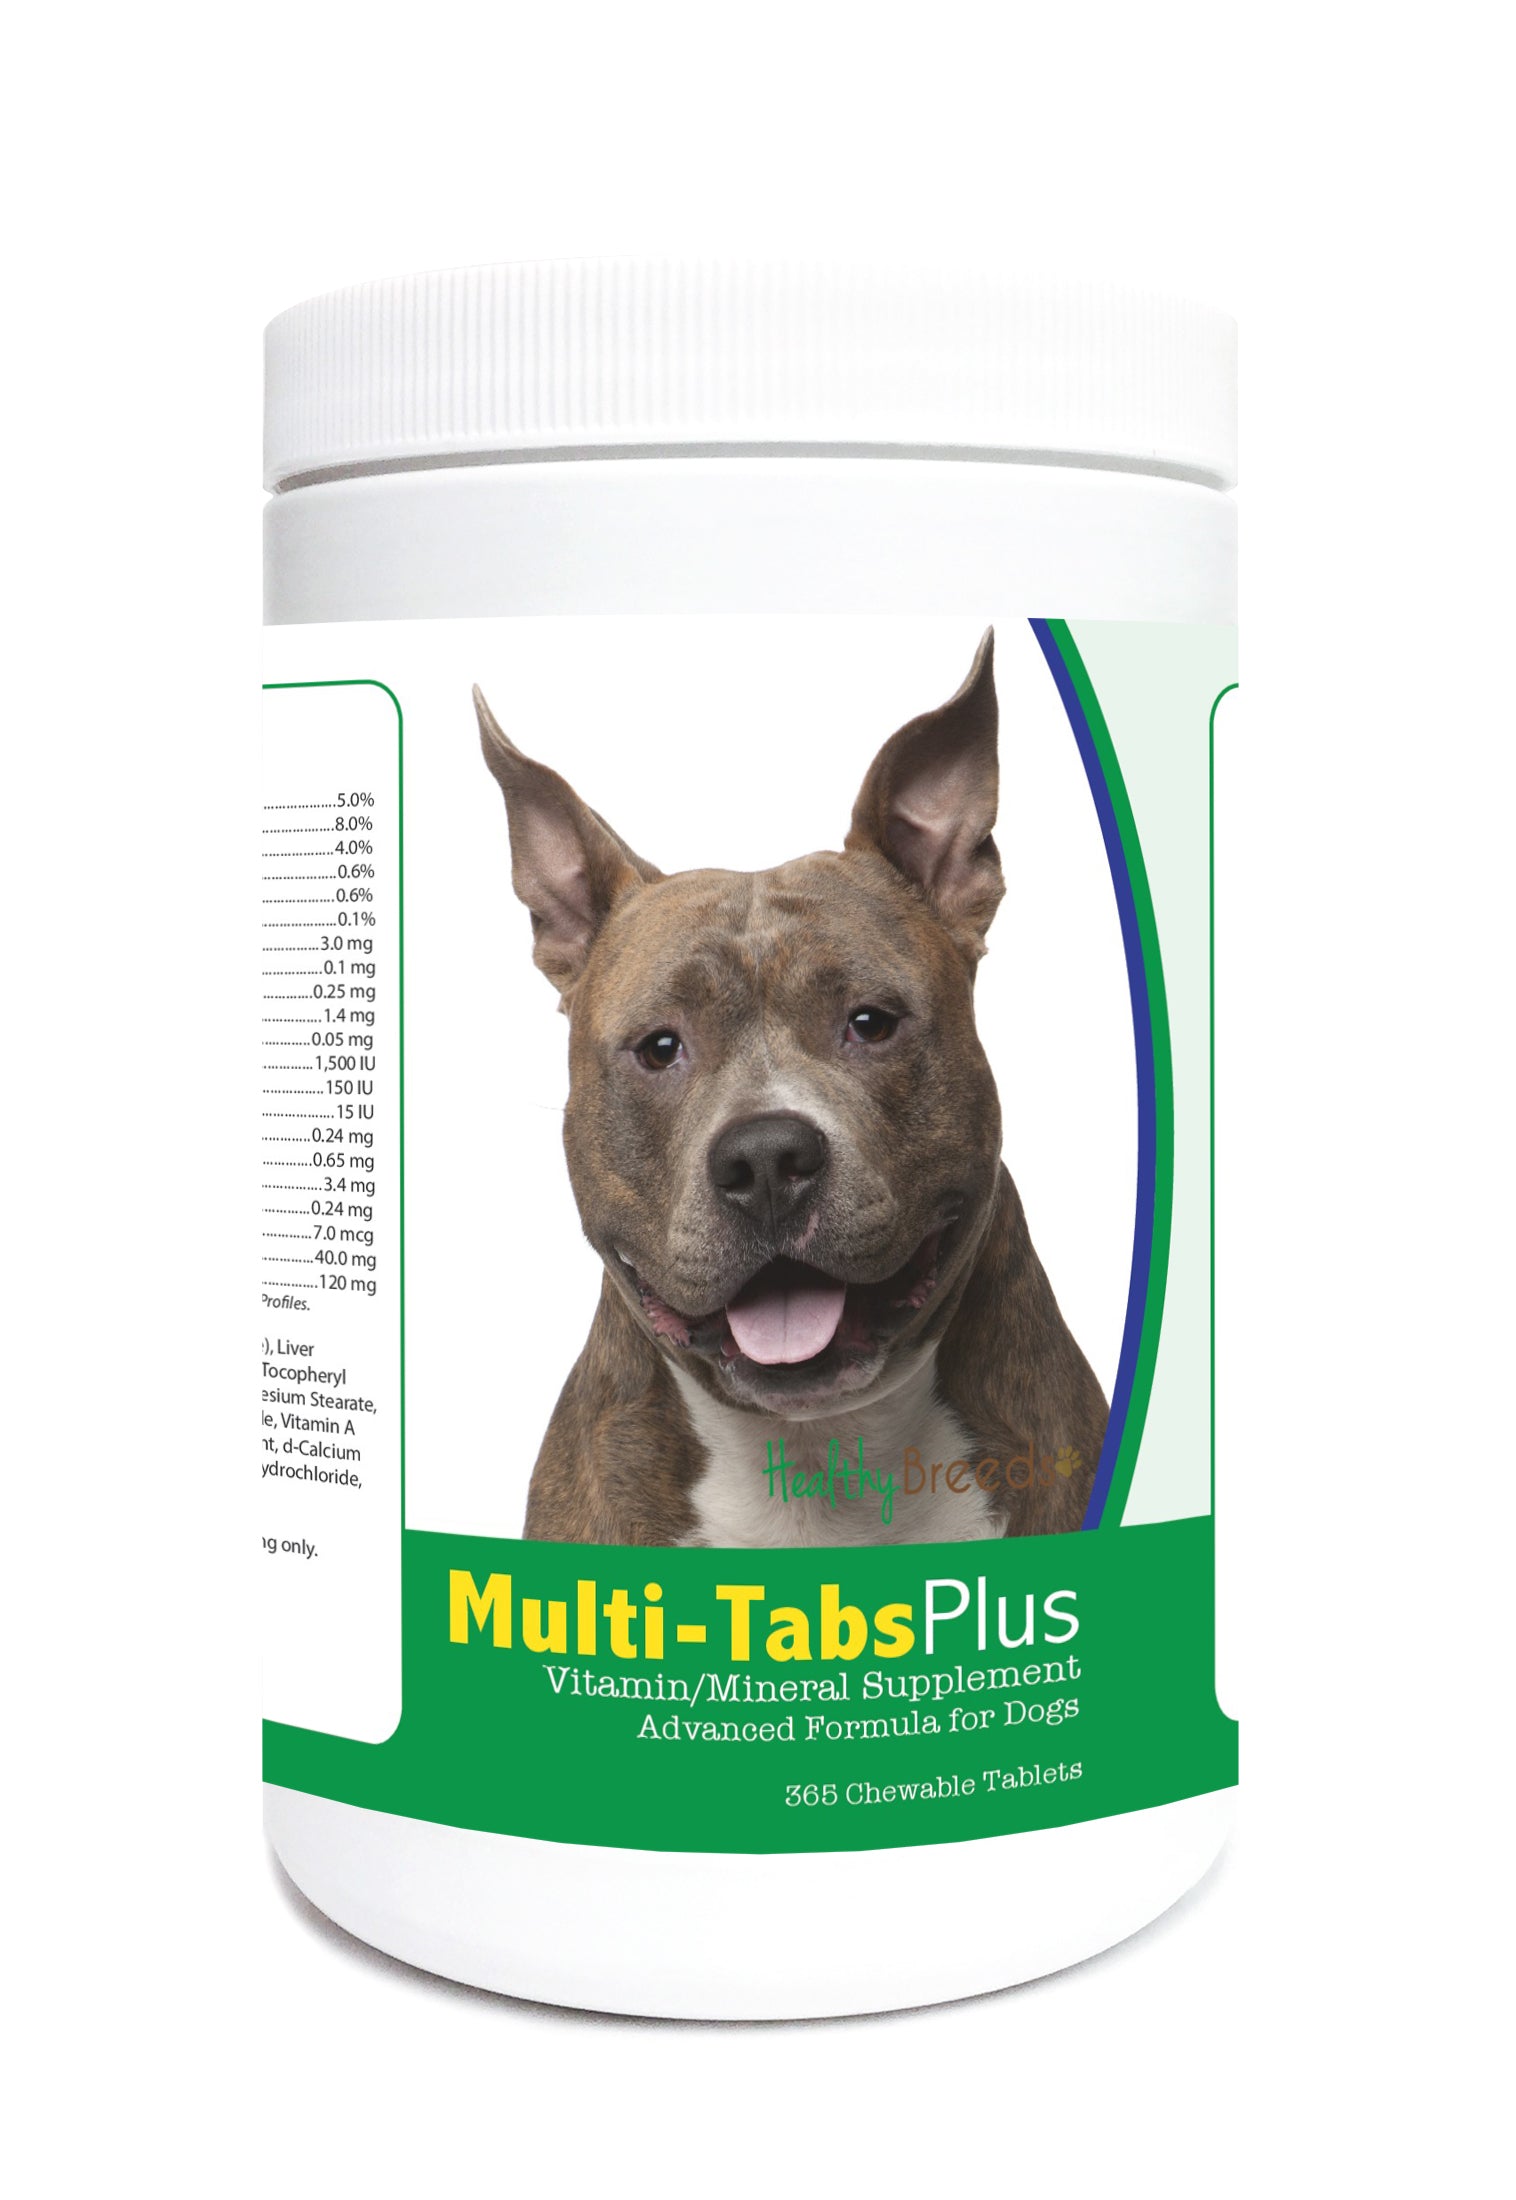 American Staffordshire Terrier Multi-Tabs Plus Chewable Tablets 365 Count